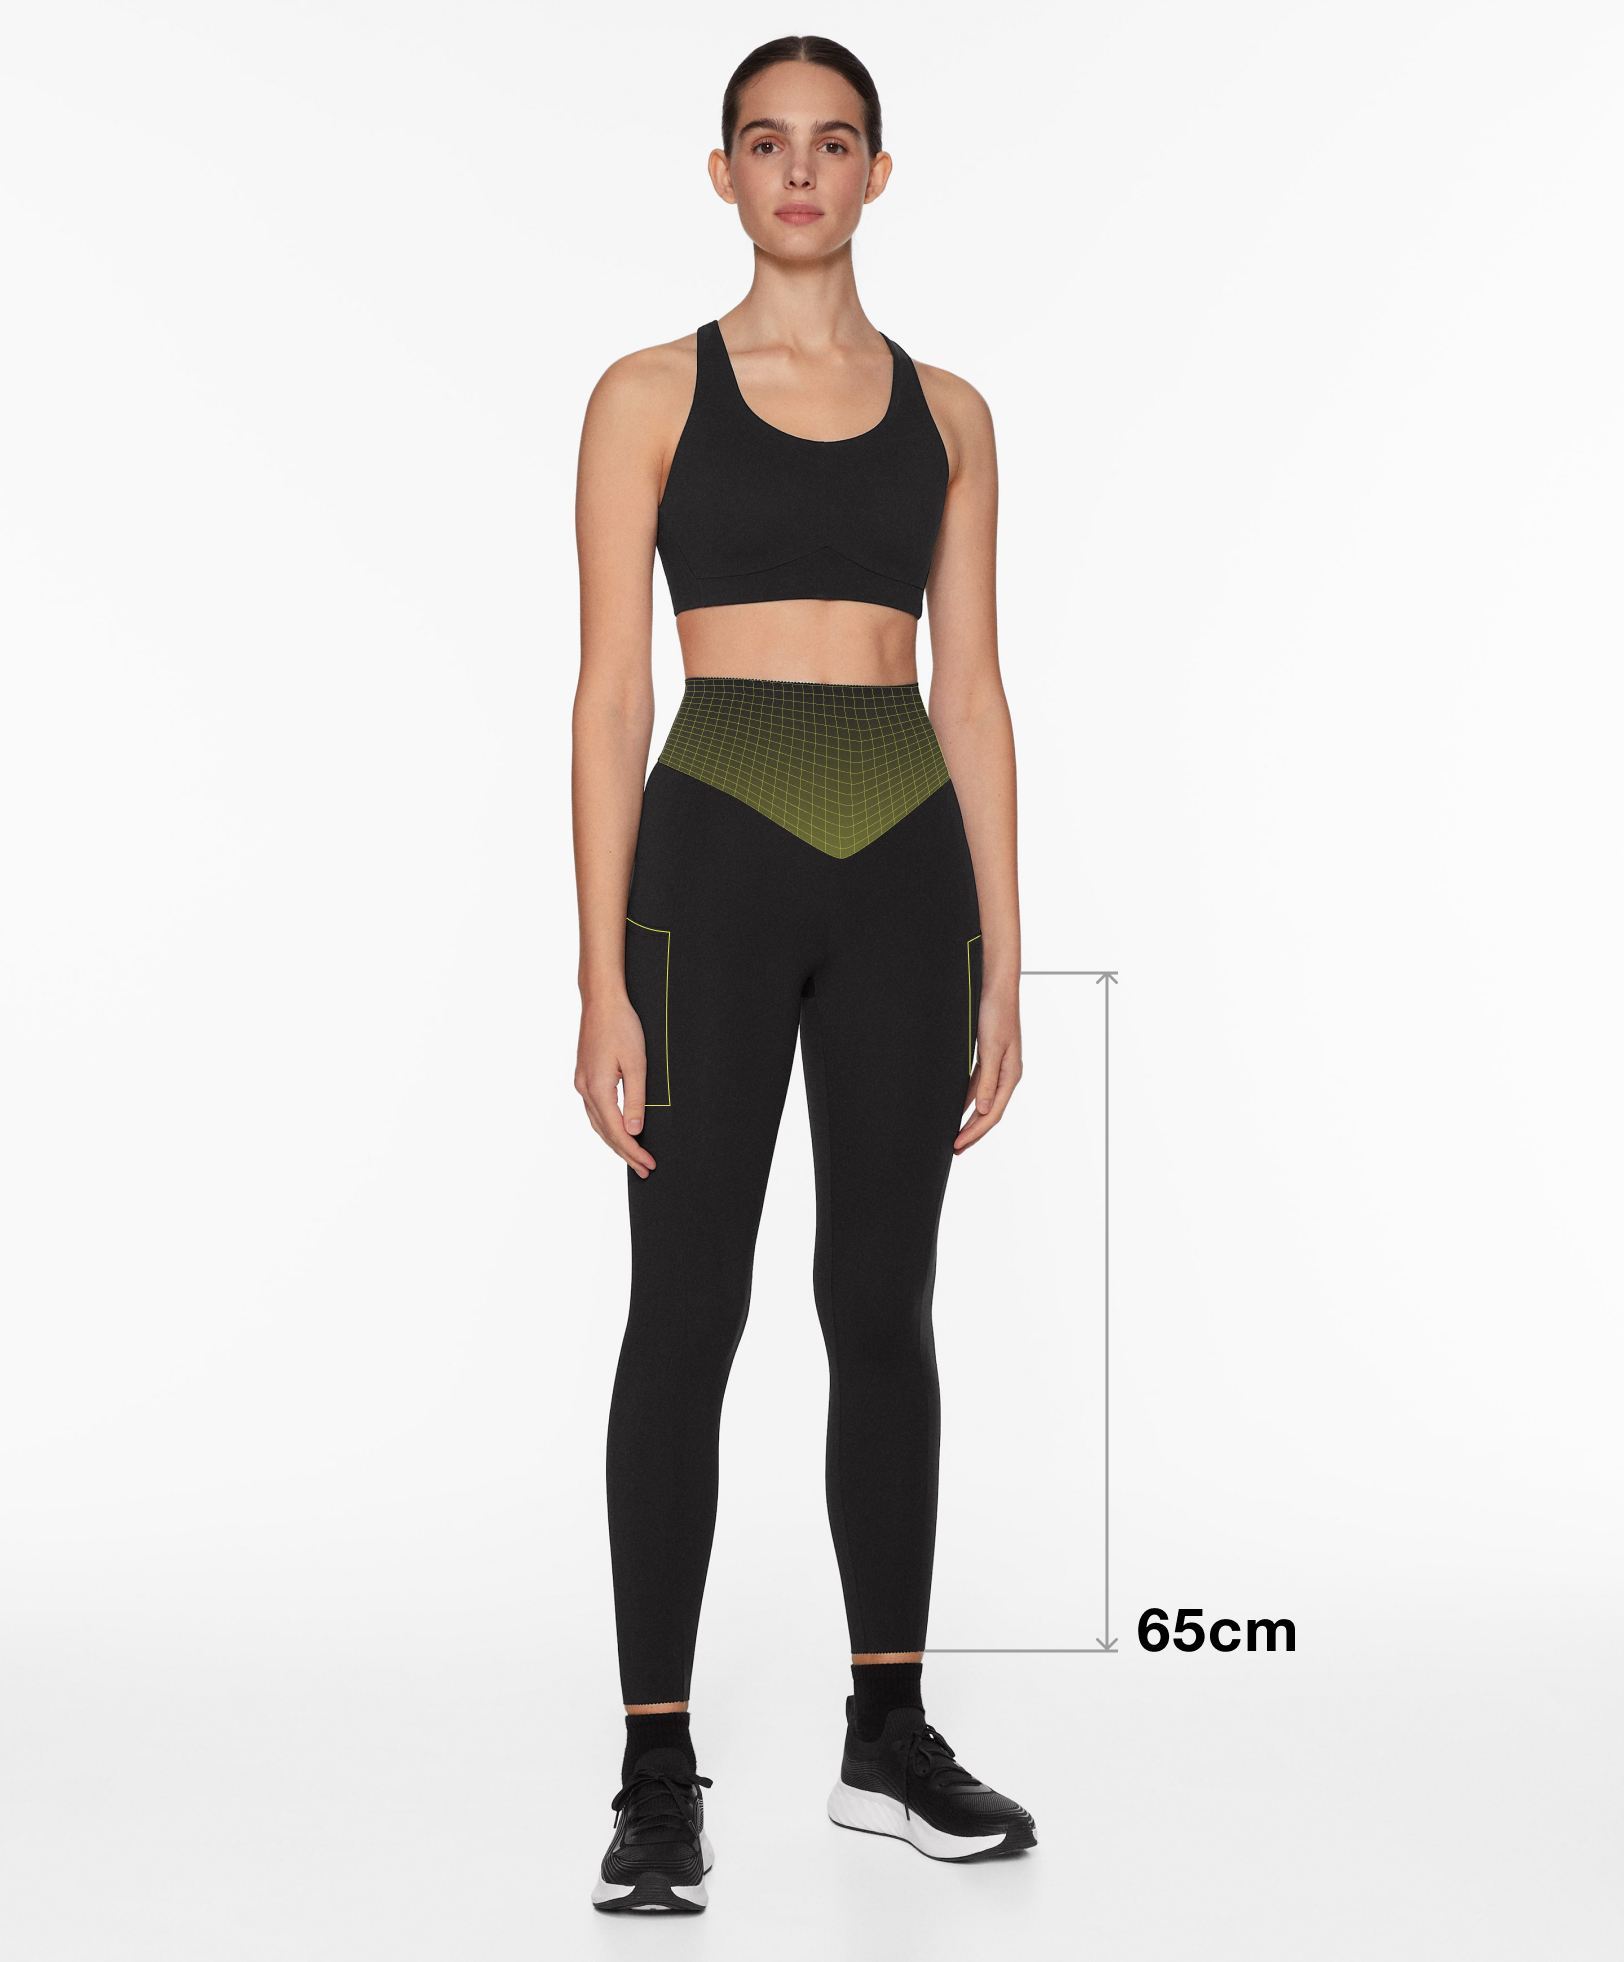 OYSHO - Compressive Collection. Keep training with our compressive